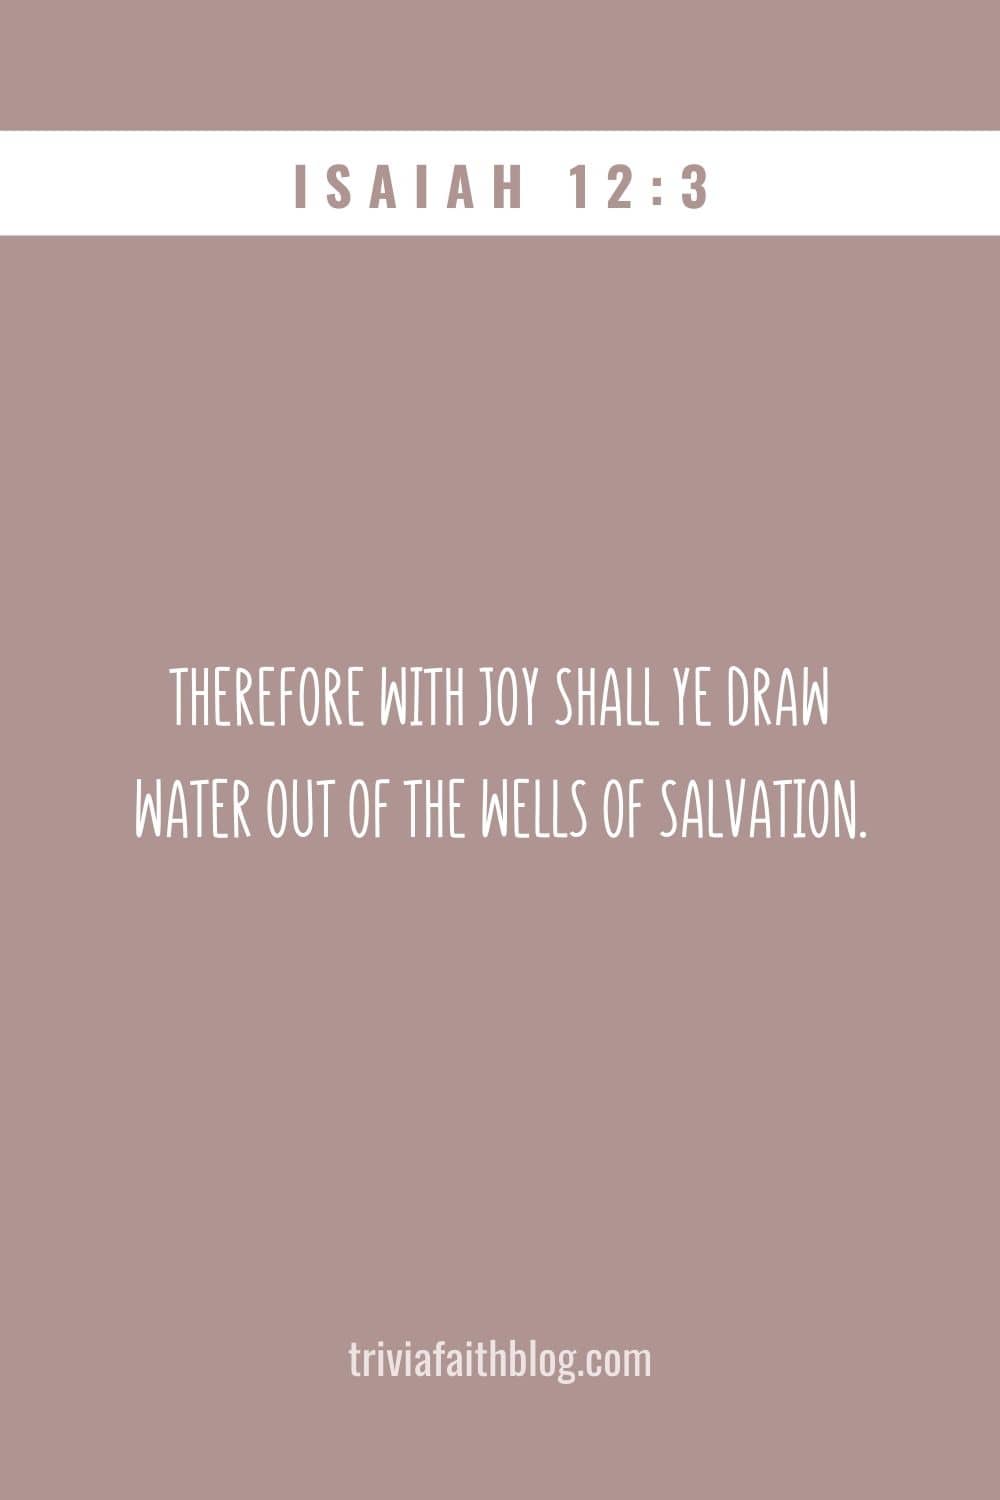 Therefore with joy shall ye draw water out of the wells of salvation